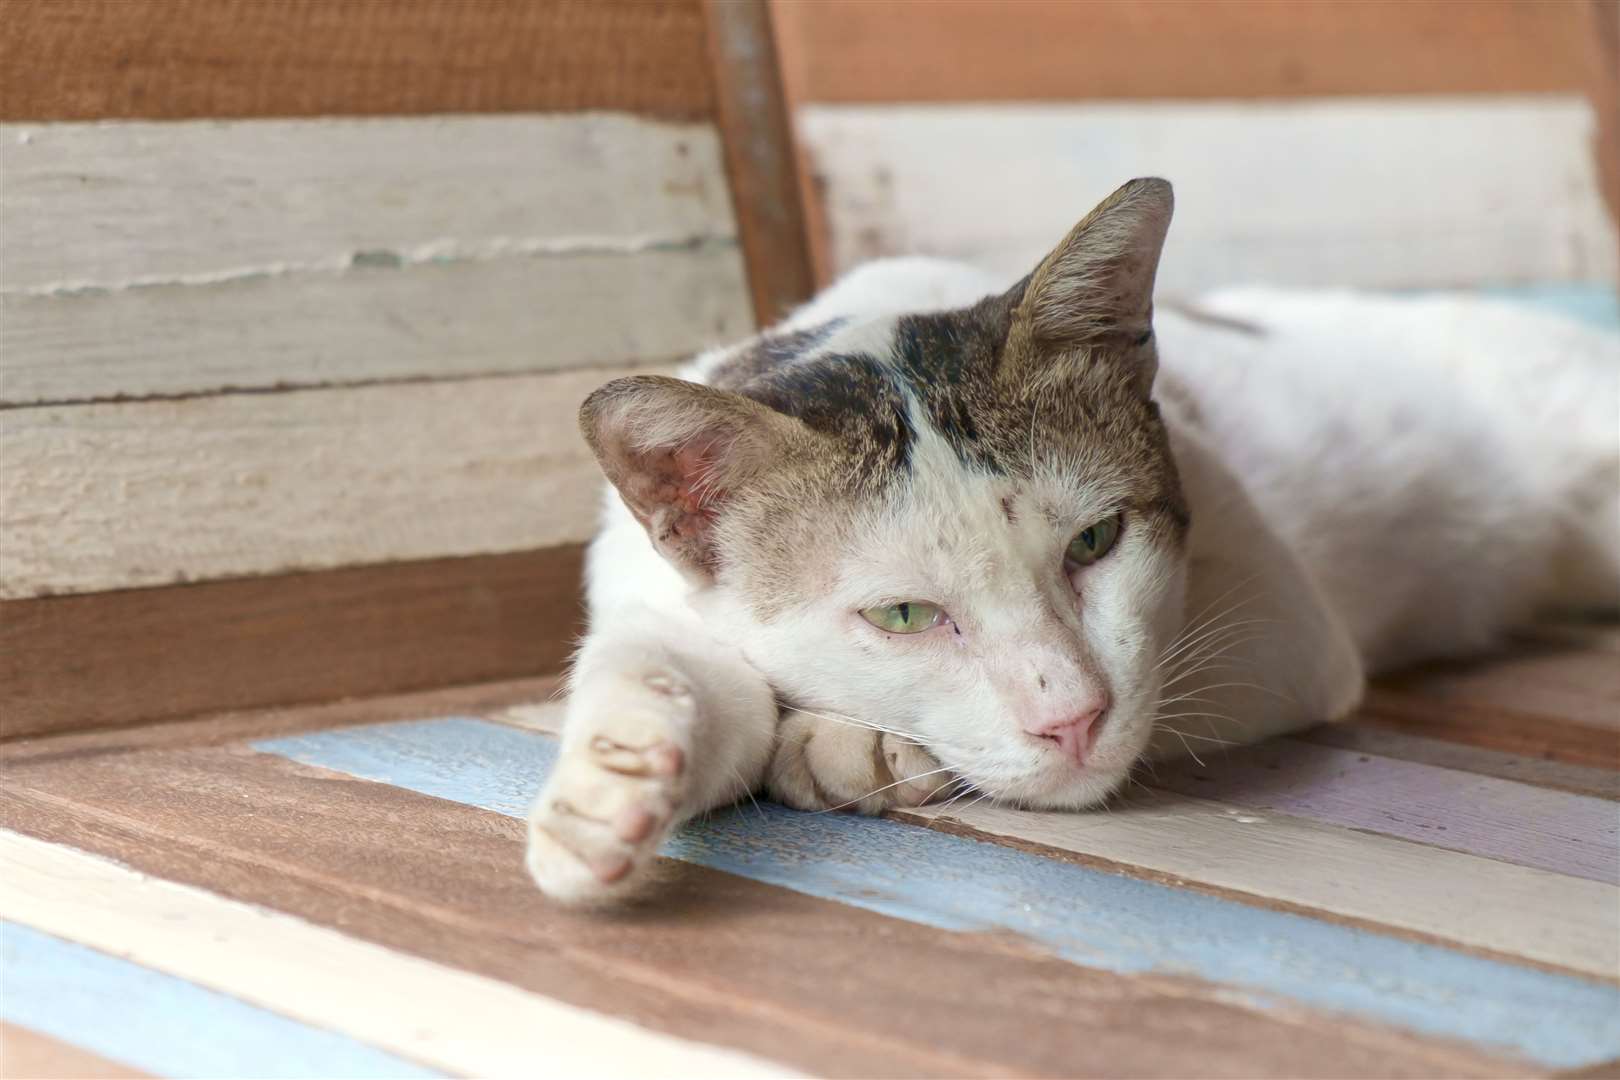 Older cats may suffer from arthritis, but there are ways to ease any discomfort.